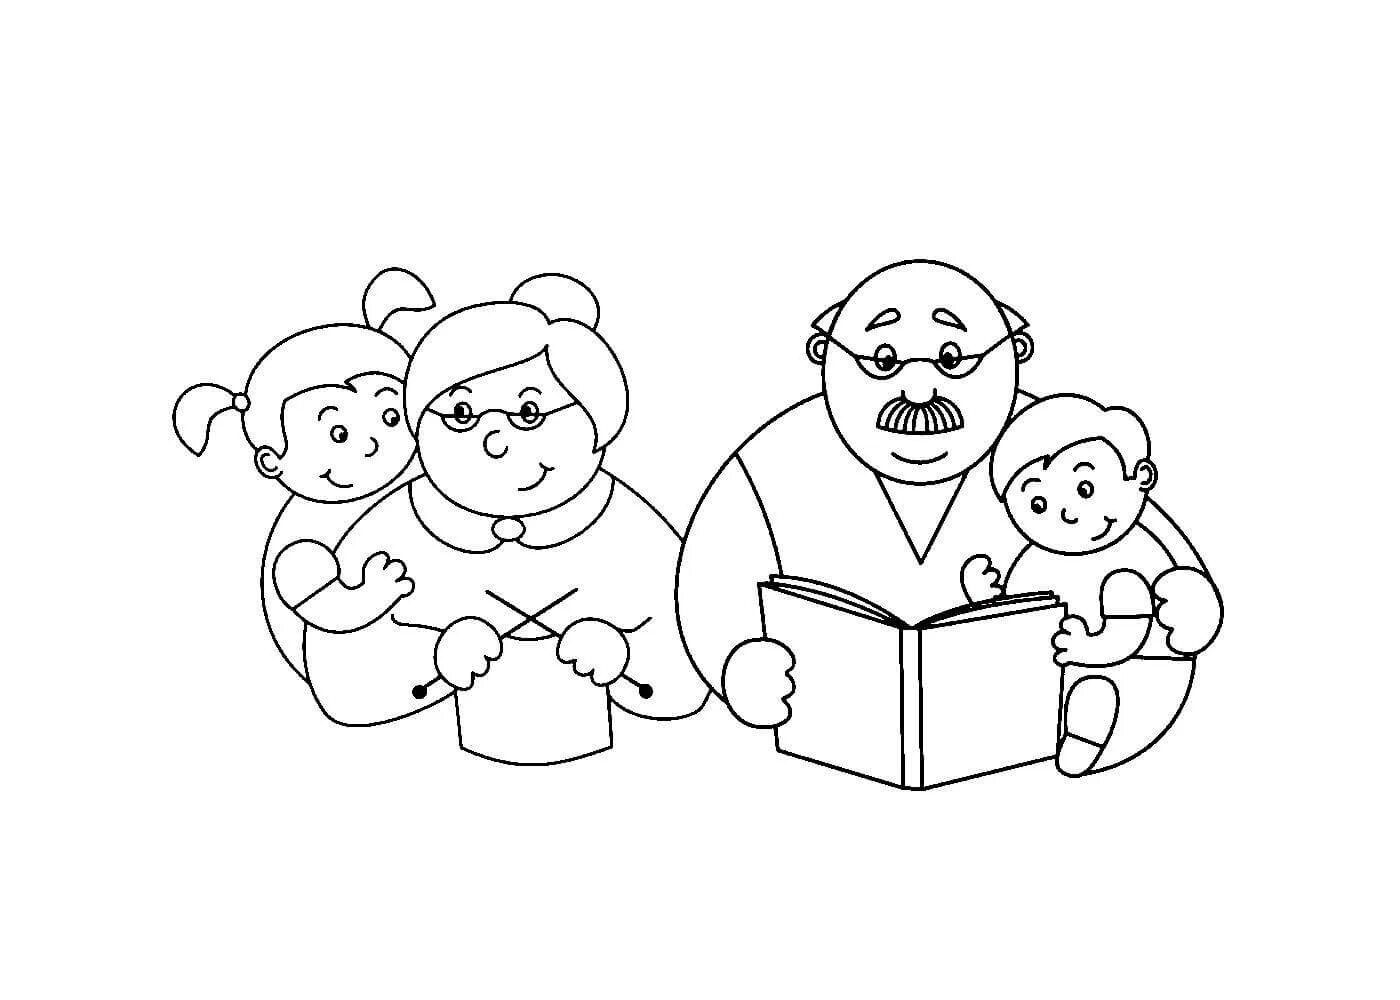 Exquisite coloring pages for grandparents for kids